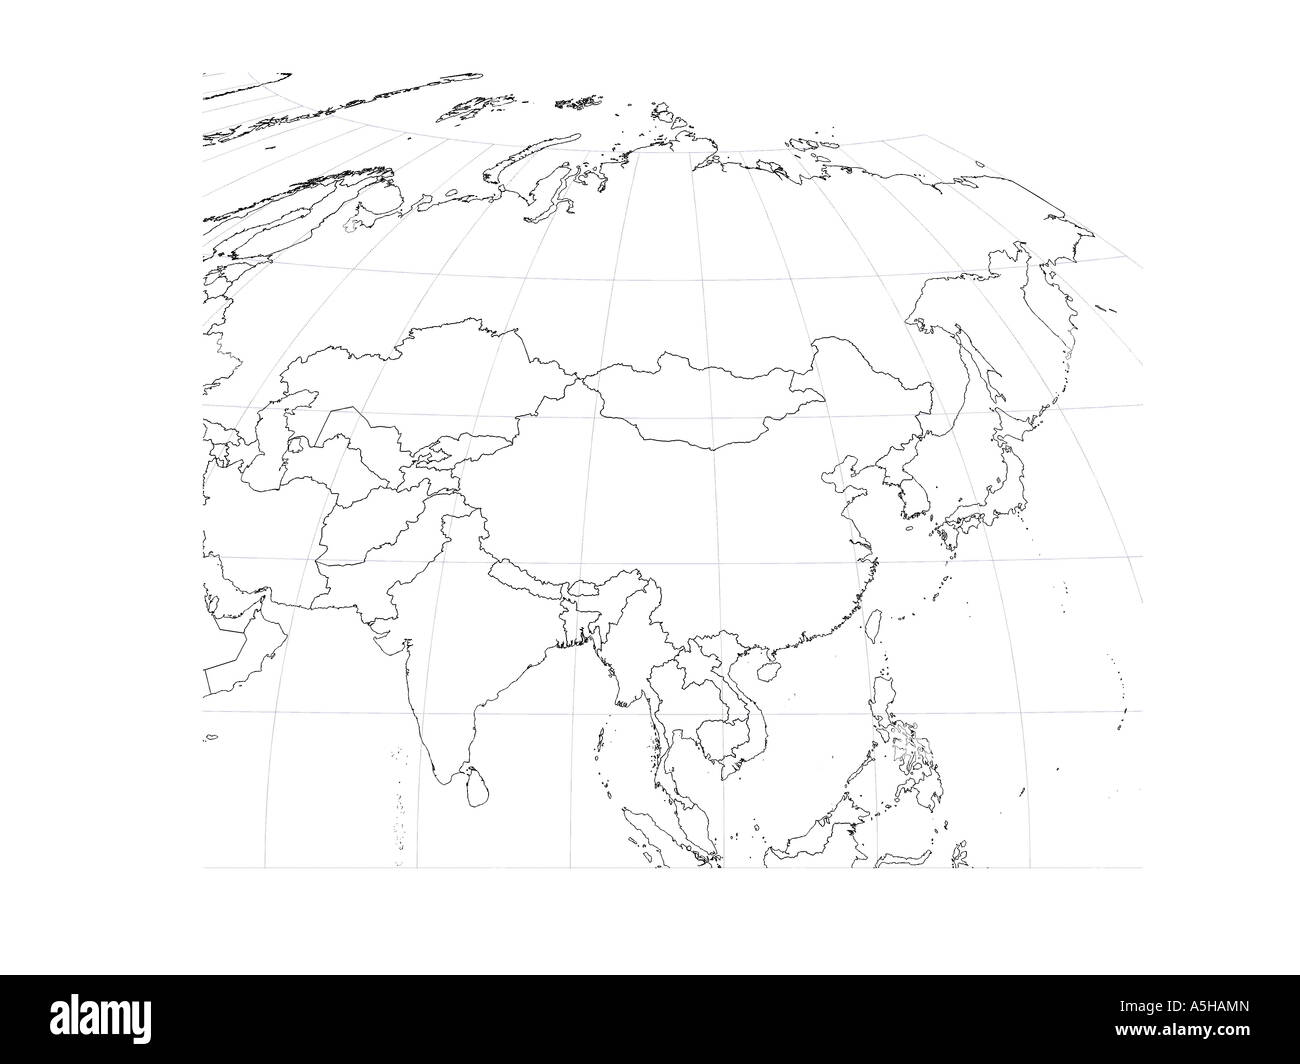 Outline politicall map of Russia india china Stock Photo